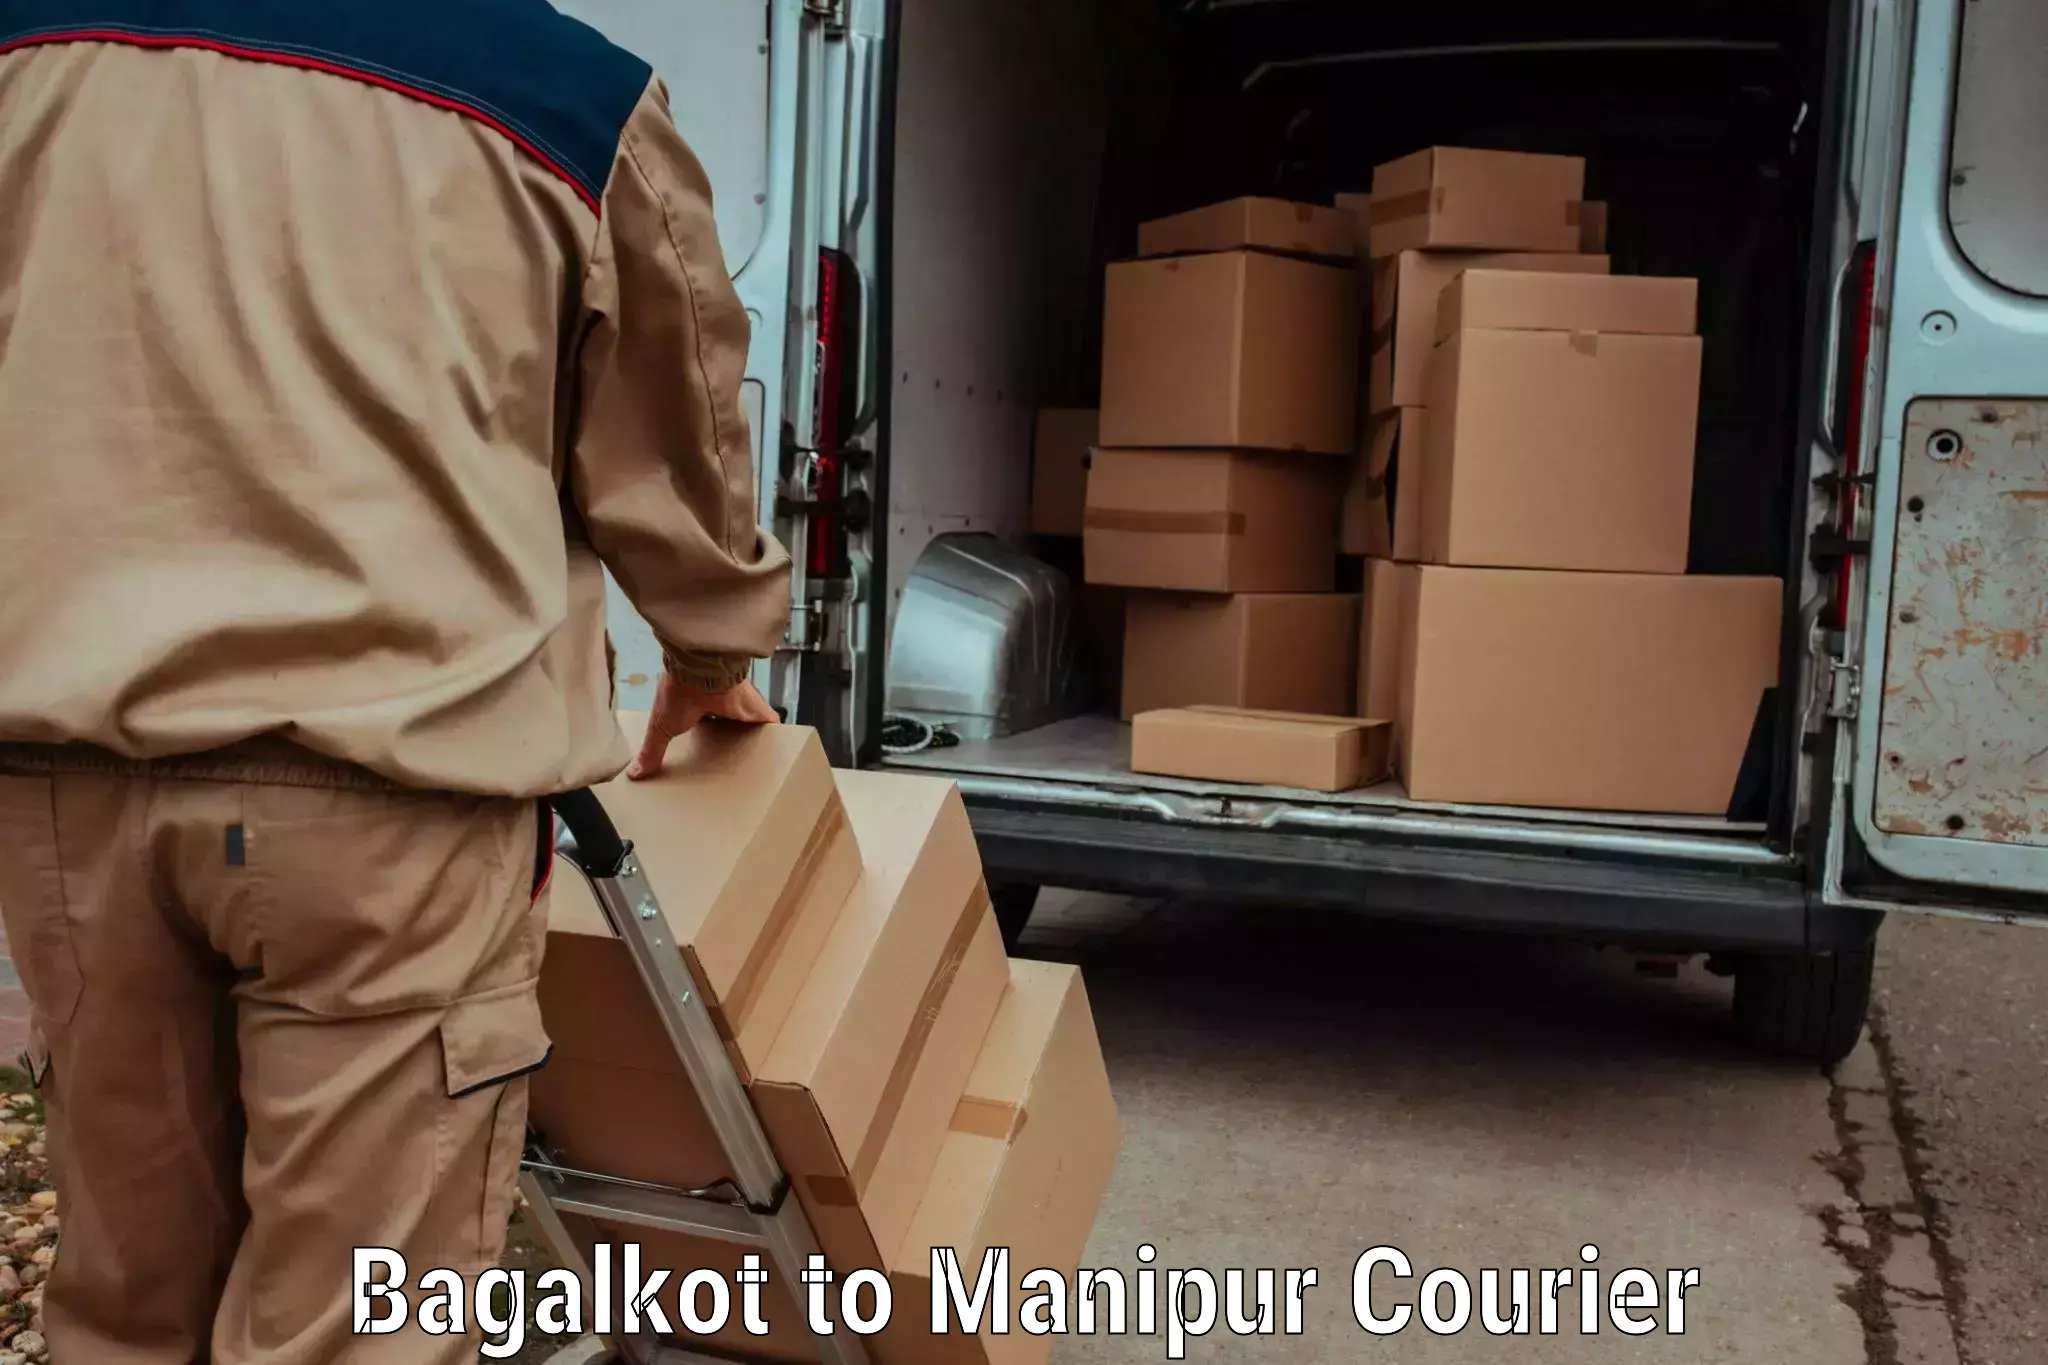 Baggage relocation service in Bagalkot to Manipur